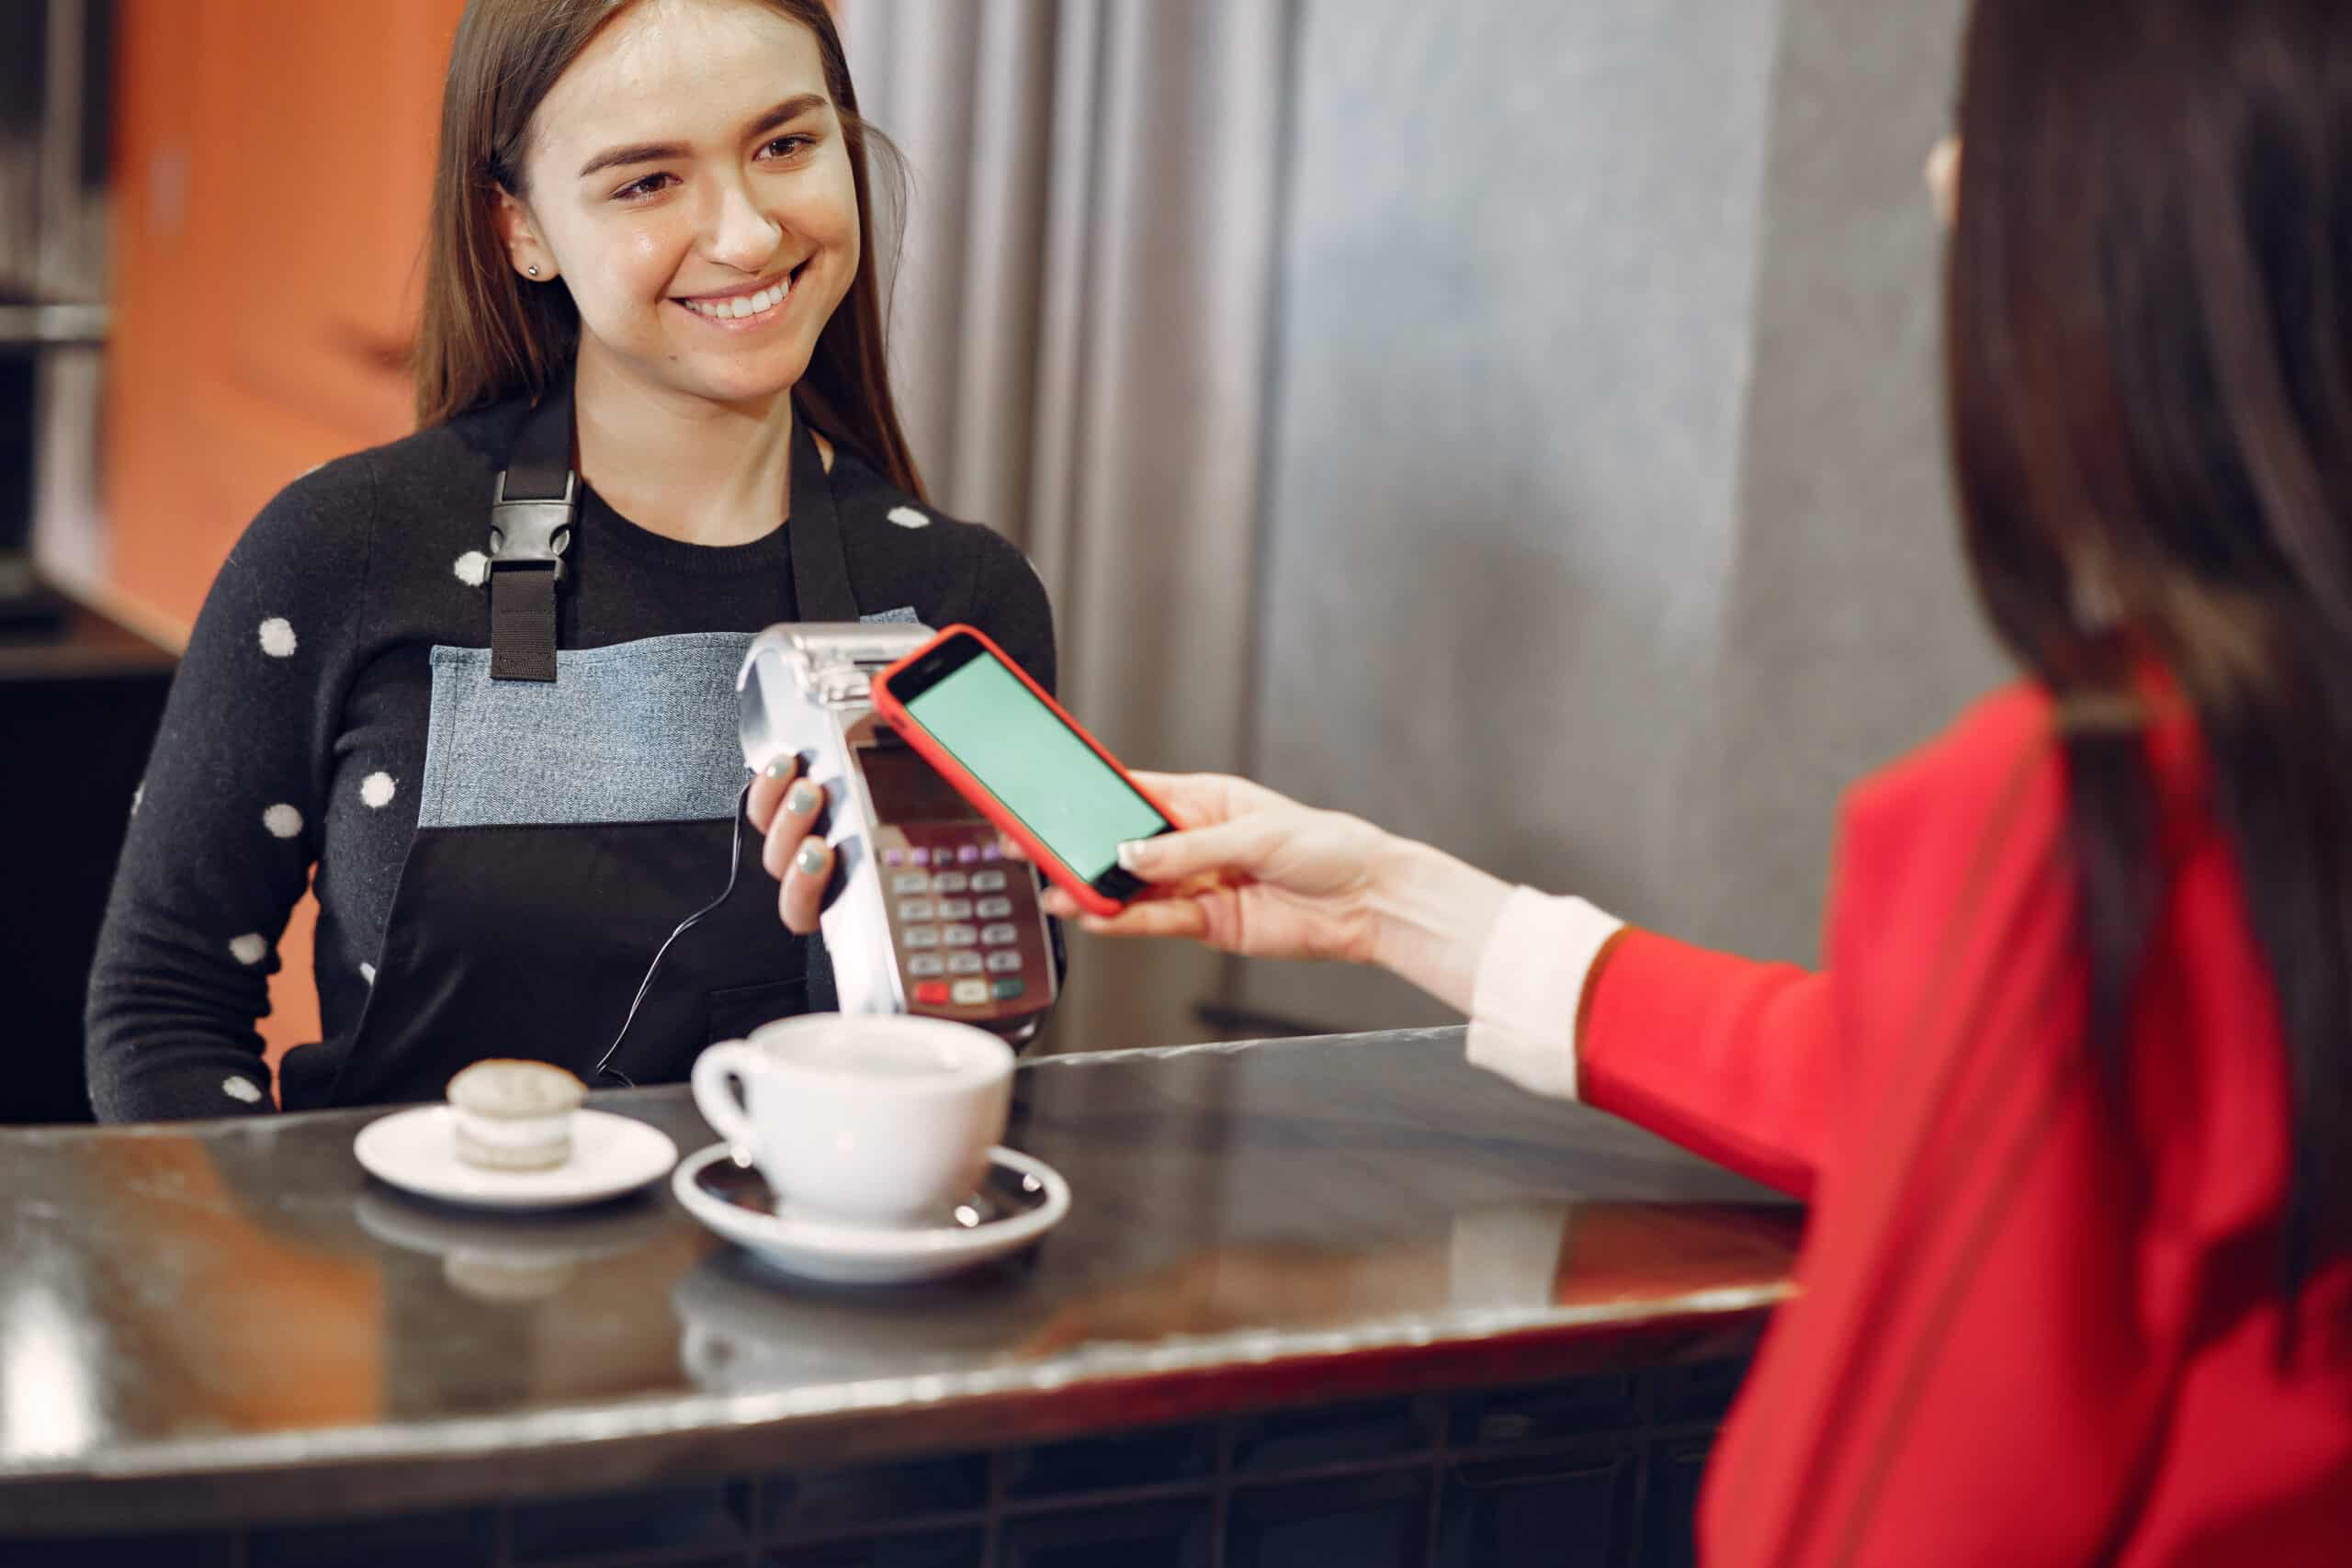 How Australians can put the brakes on spending as tap-and-go payments accelerate – The New Daily